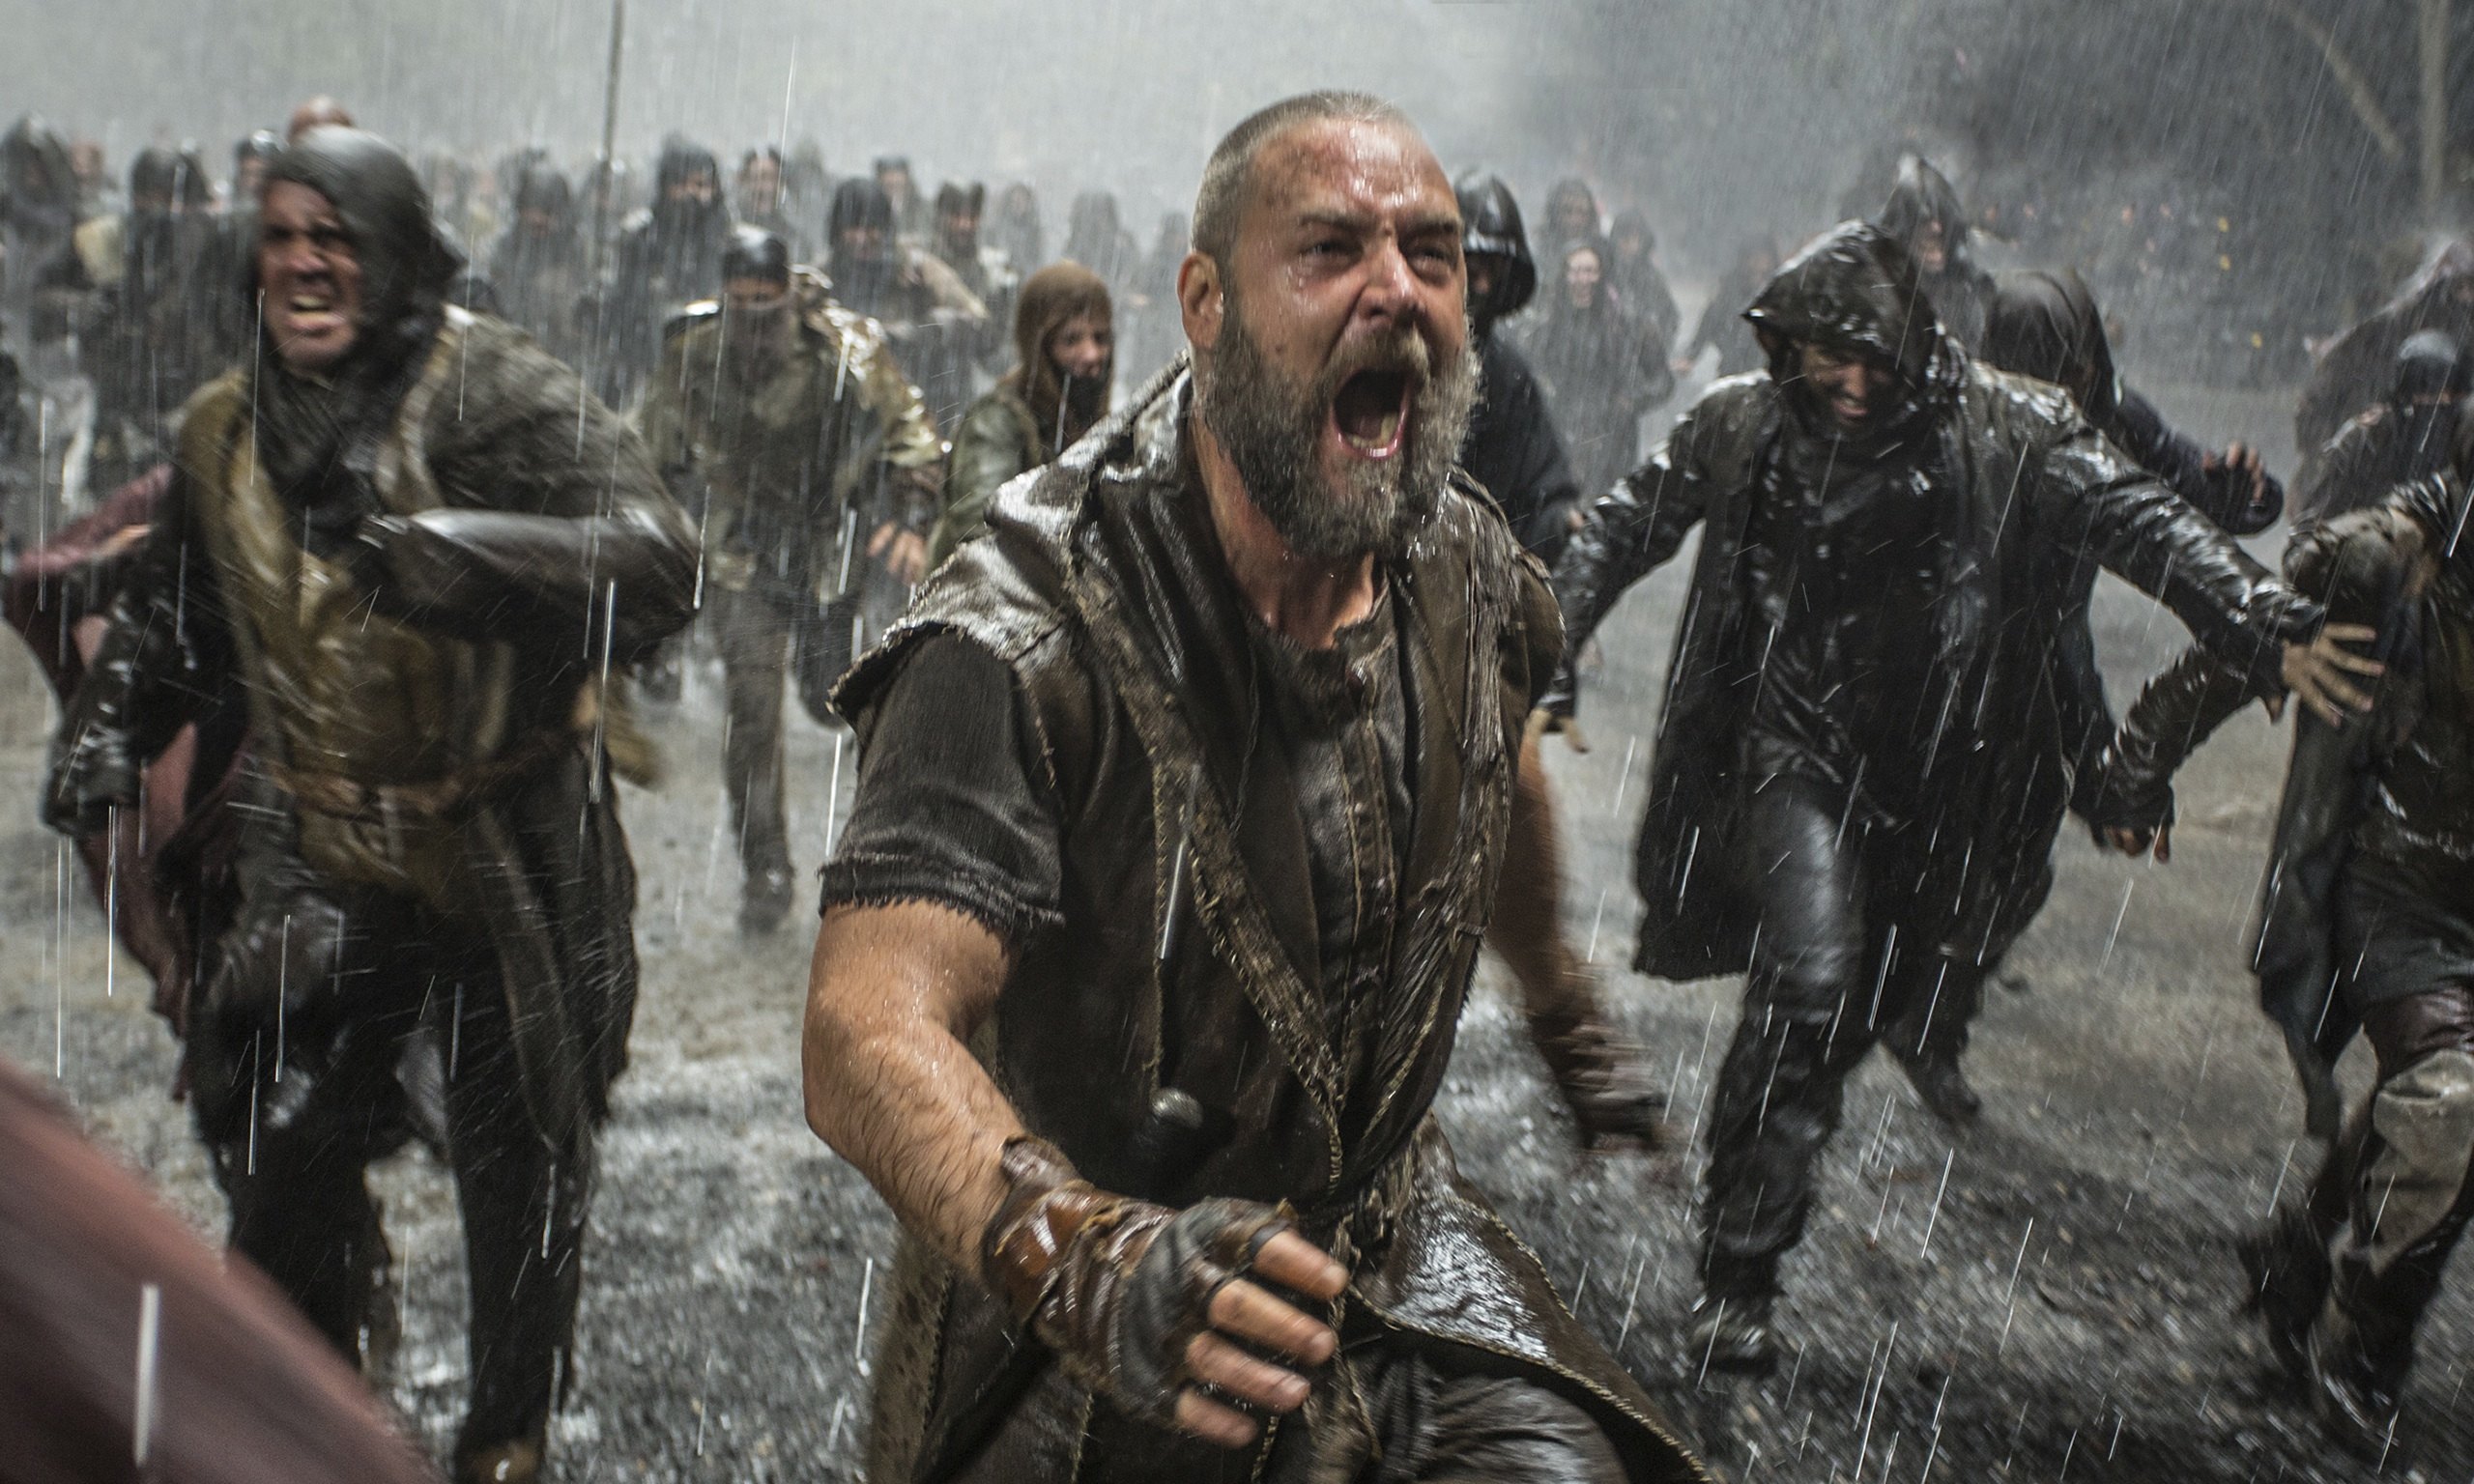 Chris Cardona (left) with Russell Crowe, charging the Ark in the film NOAH.